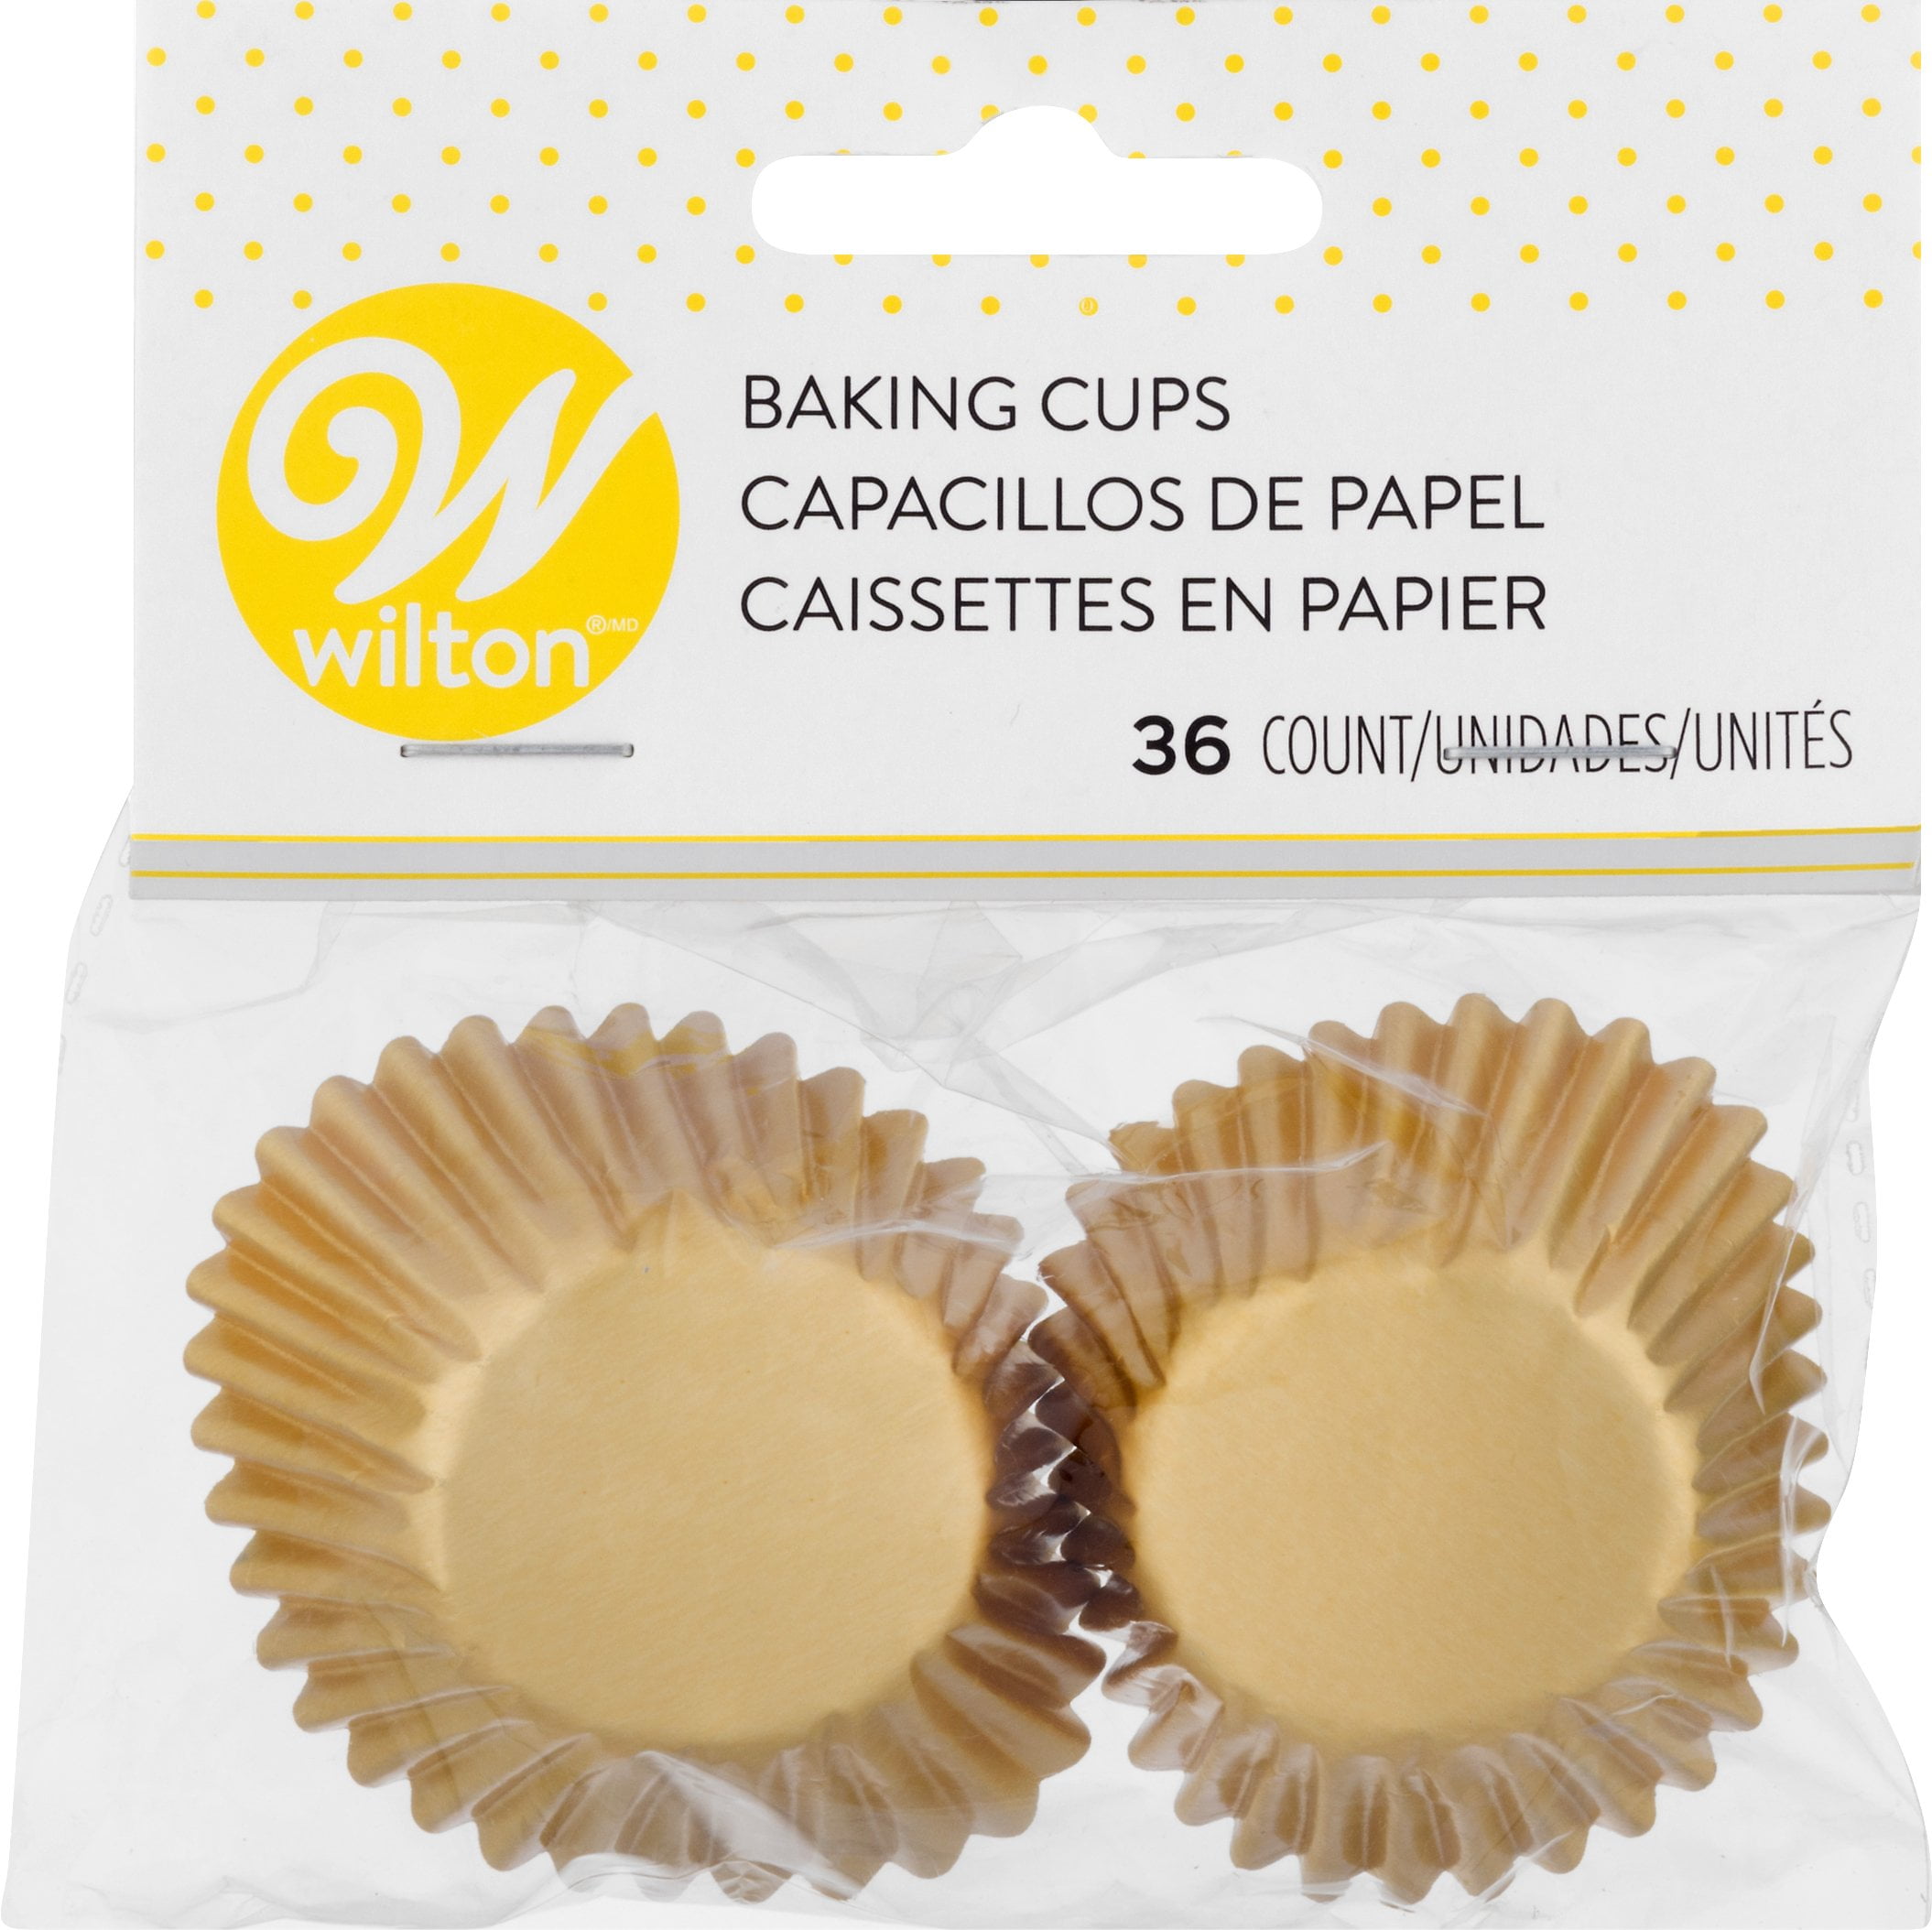 STANDARD Foil Cupcake Liners / Baking Cups – 50 ct – SHINY GOLD